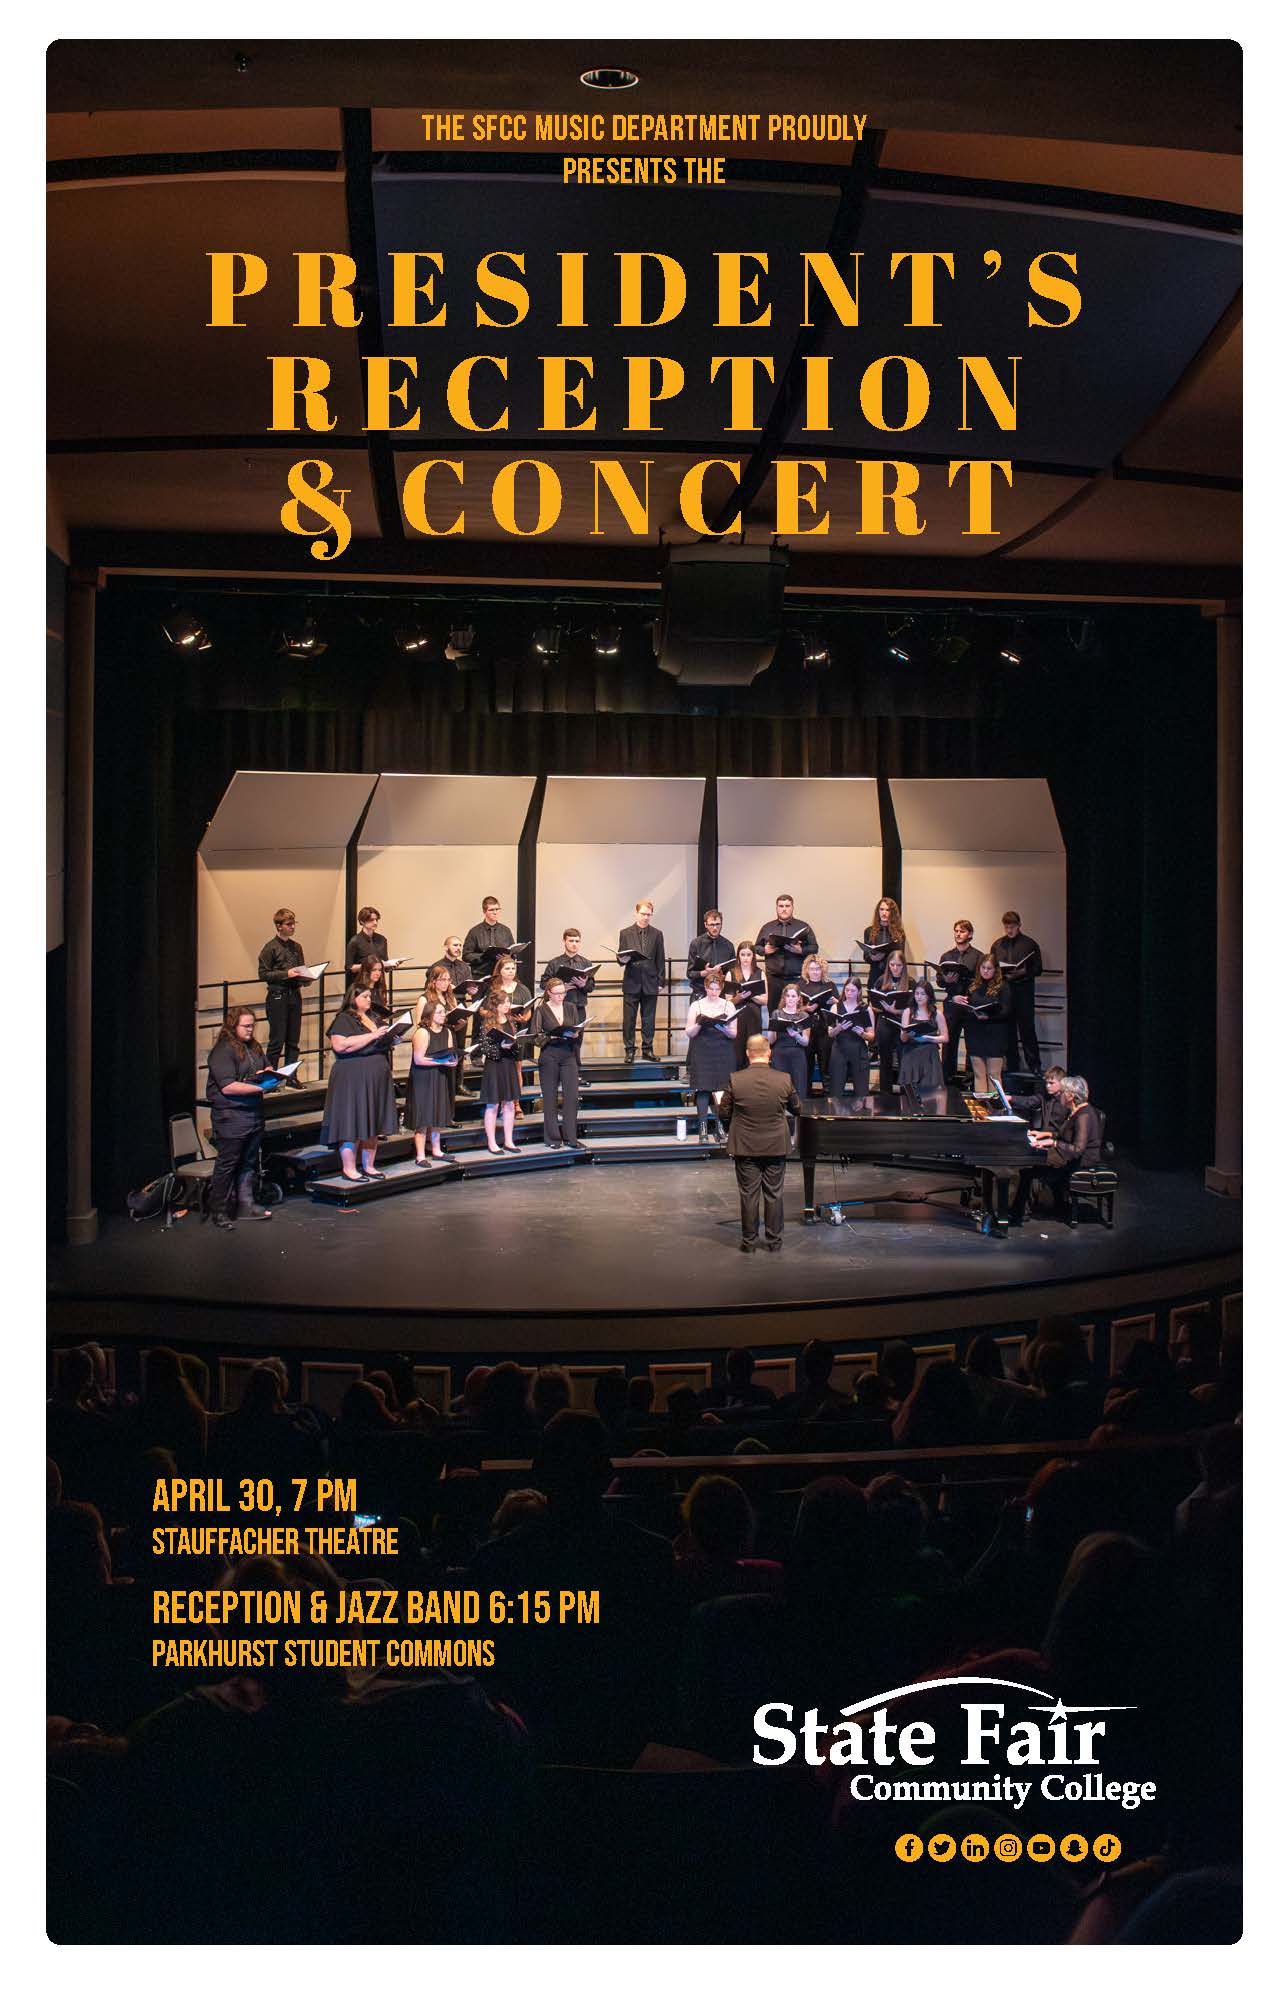 Read more about SFCC Music Arts to Present the President’s Reception & Concert April 30